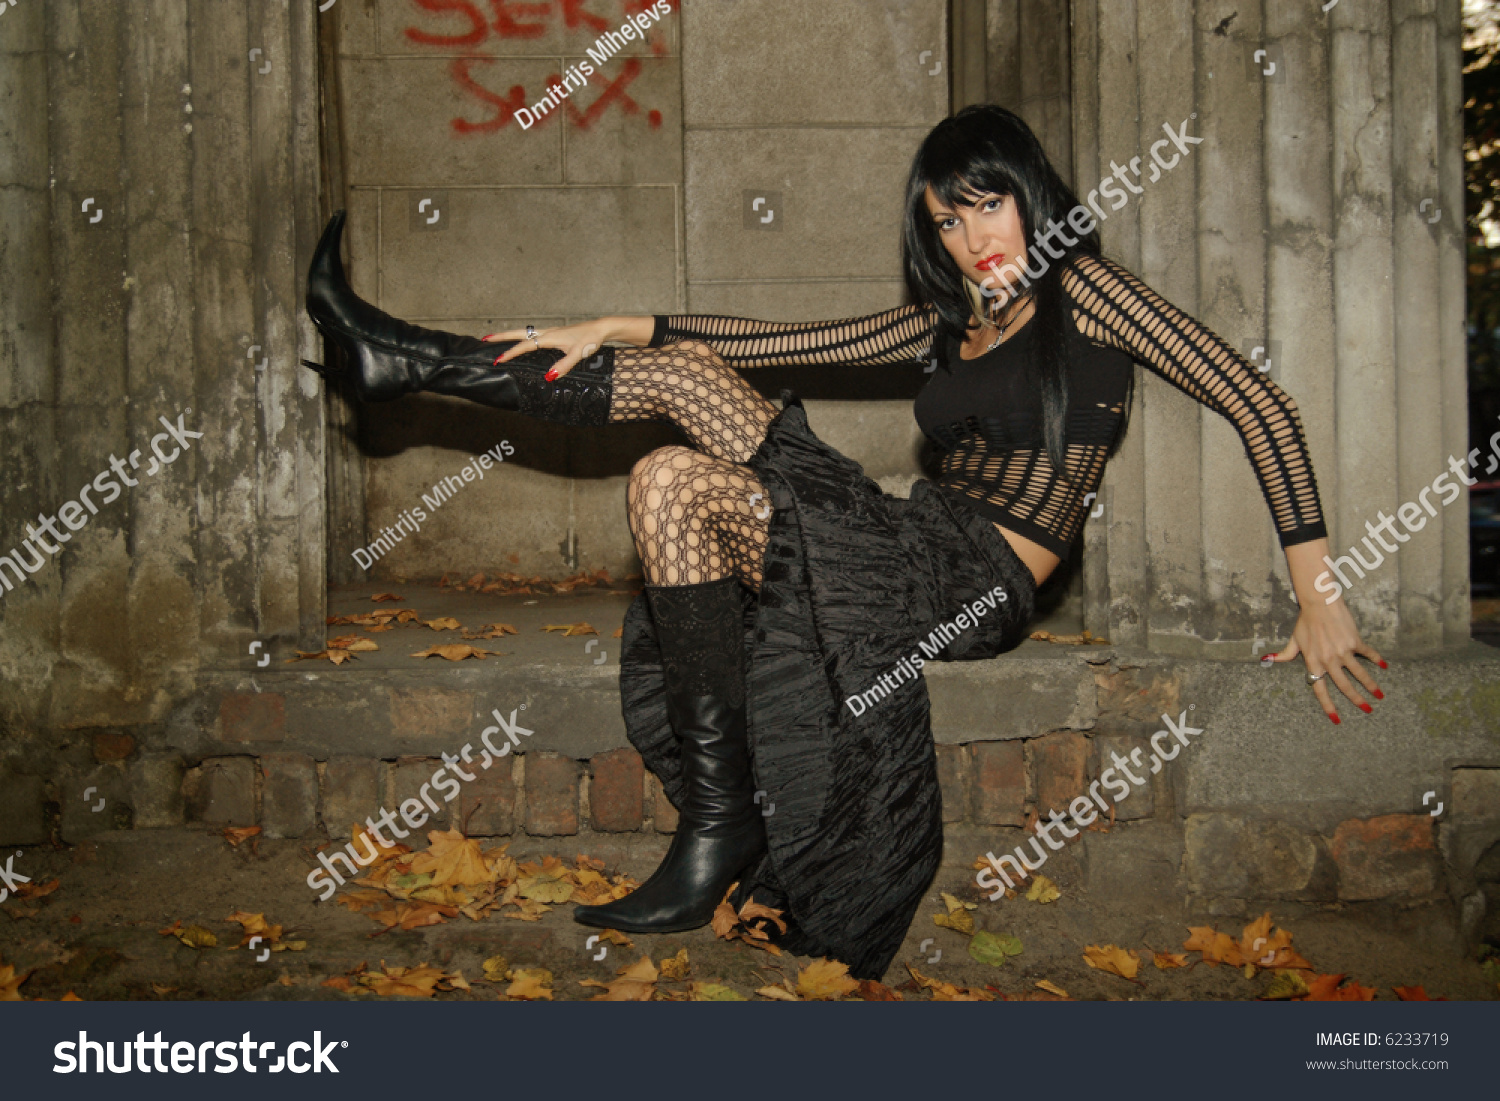 Sexy Goth Girl Sitting On Concrete Stock Photo 6233719 : Shutterstock